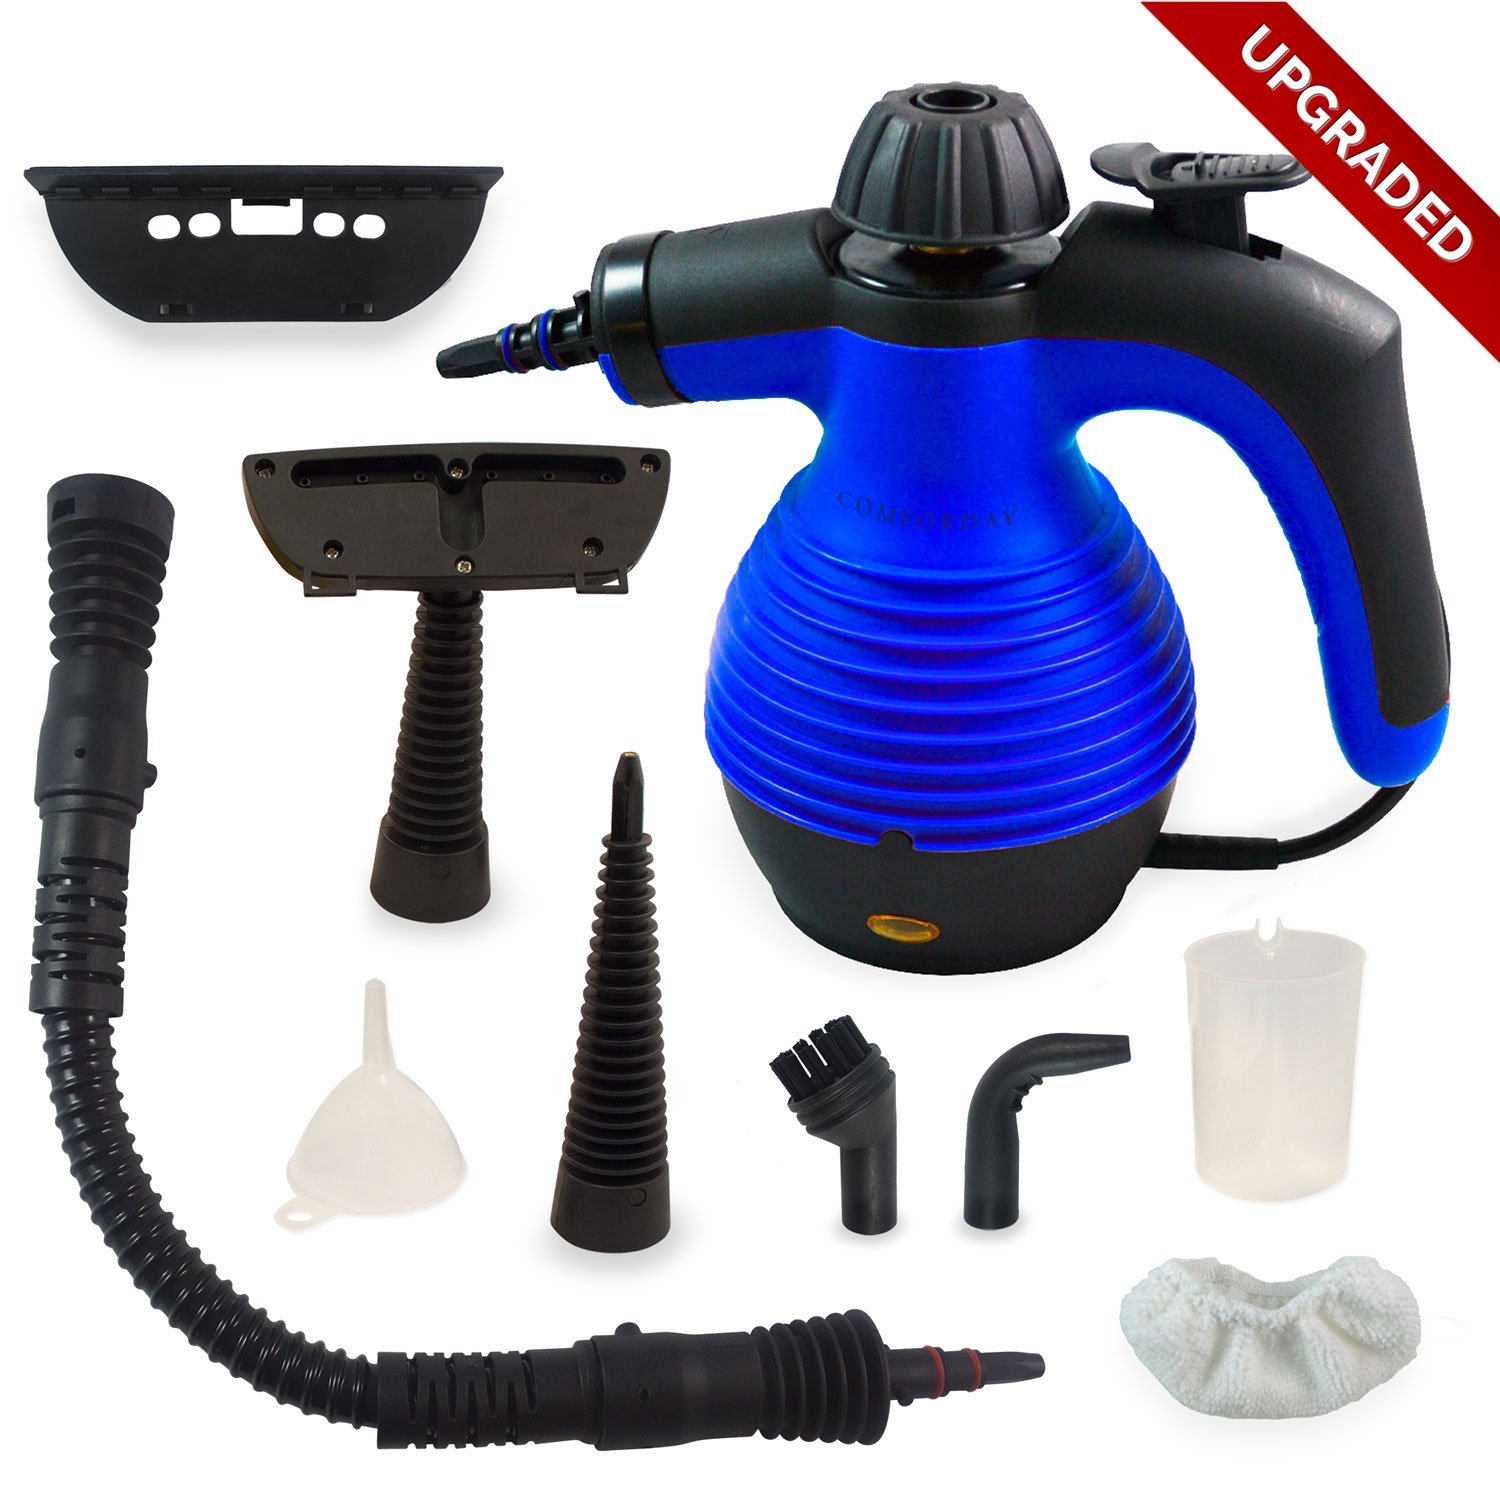 ALL IN ONE Comforday Handheld Steam Cleaner – Just $31.99!